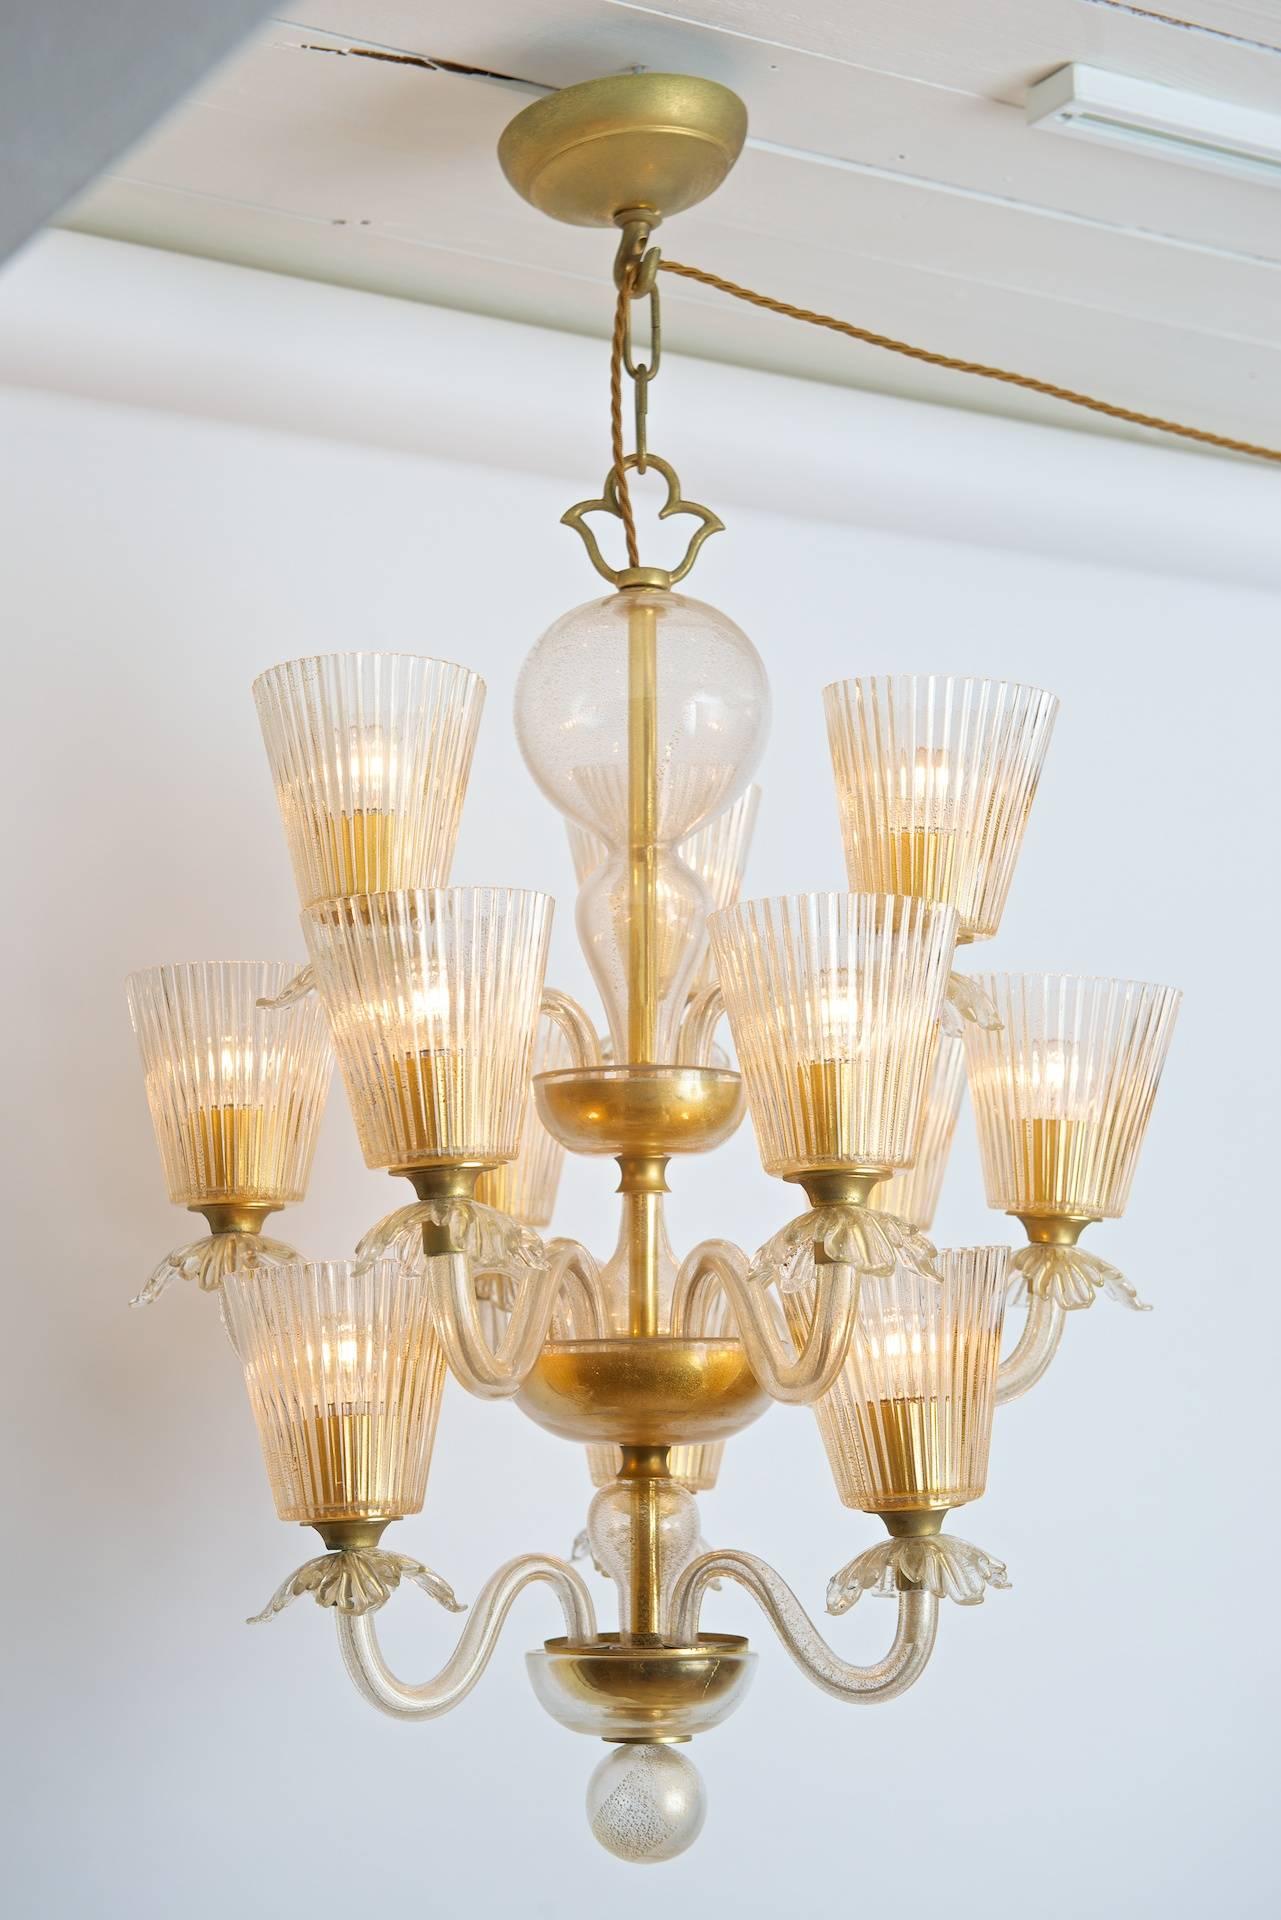 Excellent quality chandelier probably Venini or Barovier.

Blown glass with gold inclusions.